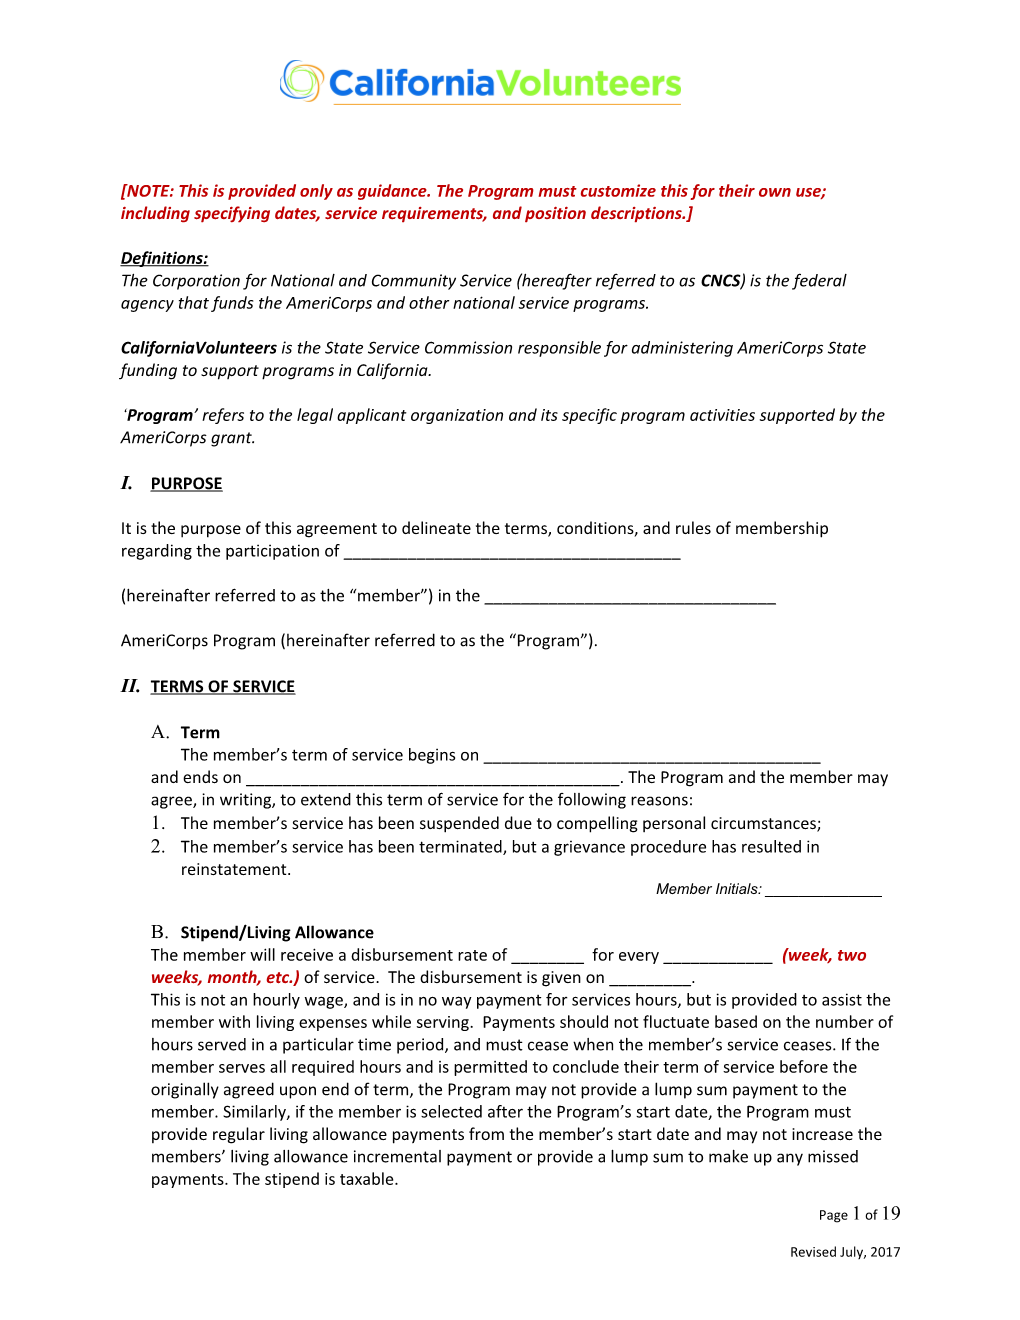 Sample Member Contract for Participation in Americorps